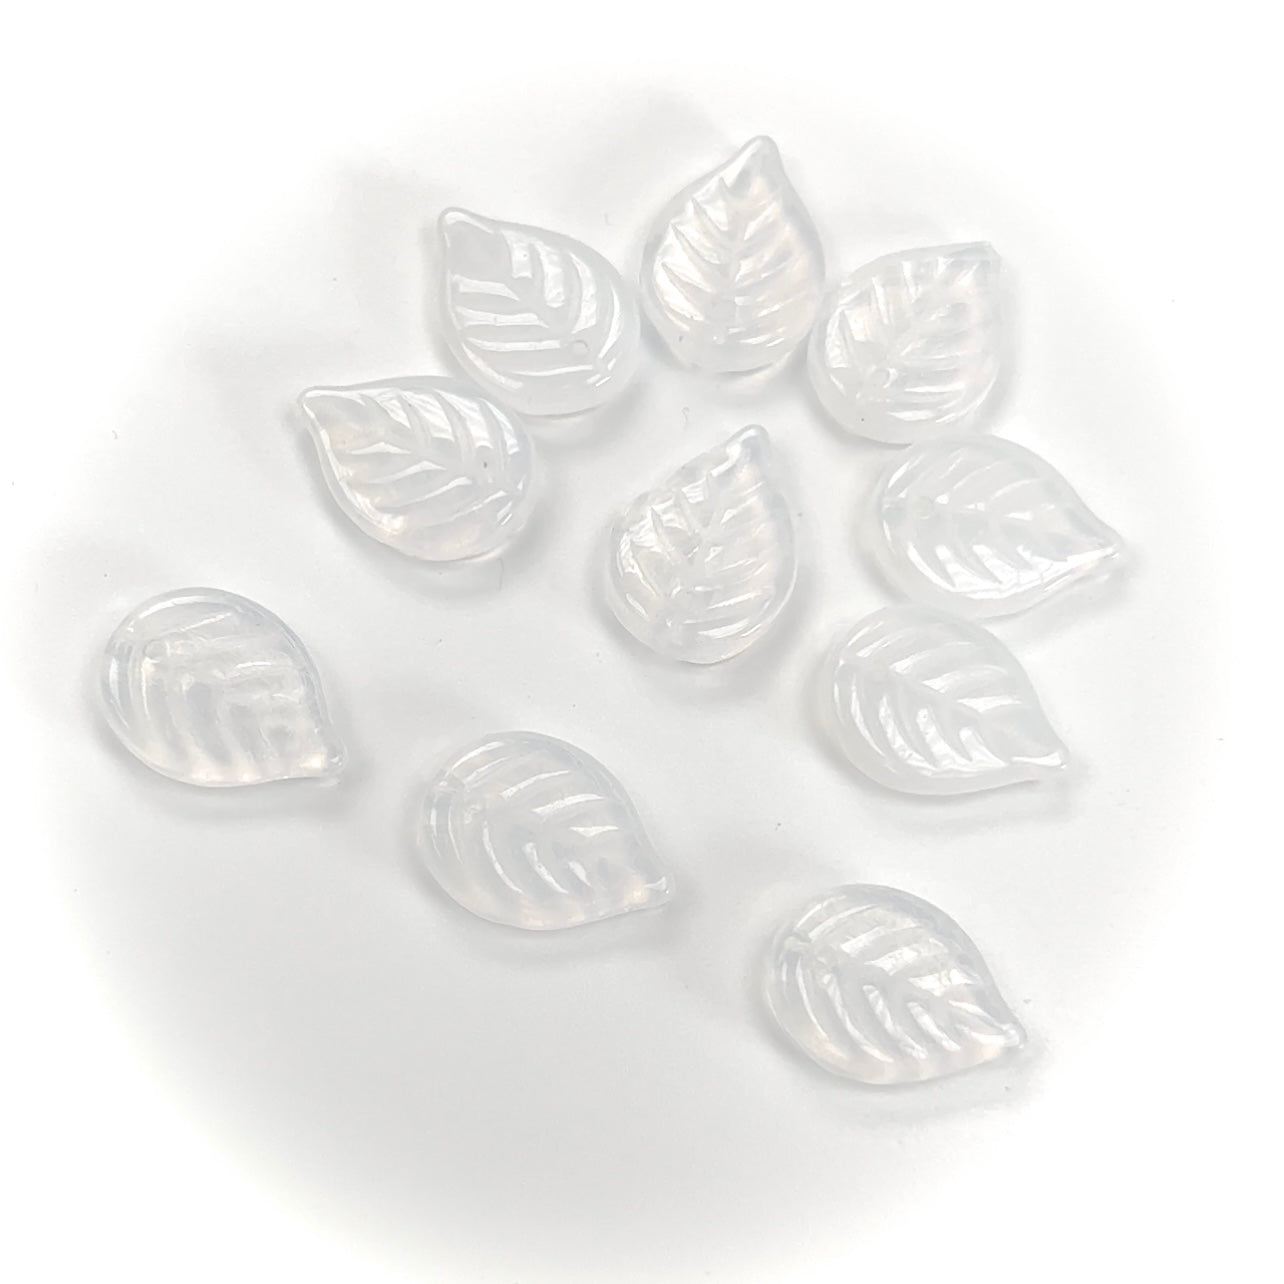 Czech Glass Druk Pendant Beads in size 18x13mm, top drilled Leaf, White Opal color, 50pcs, J056